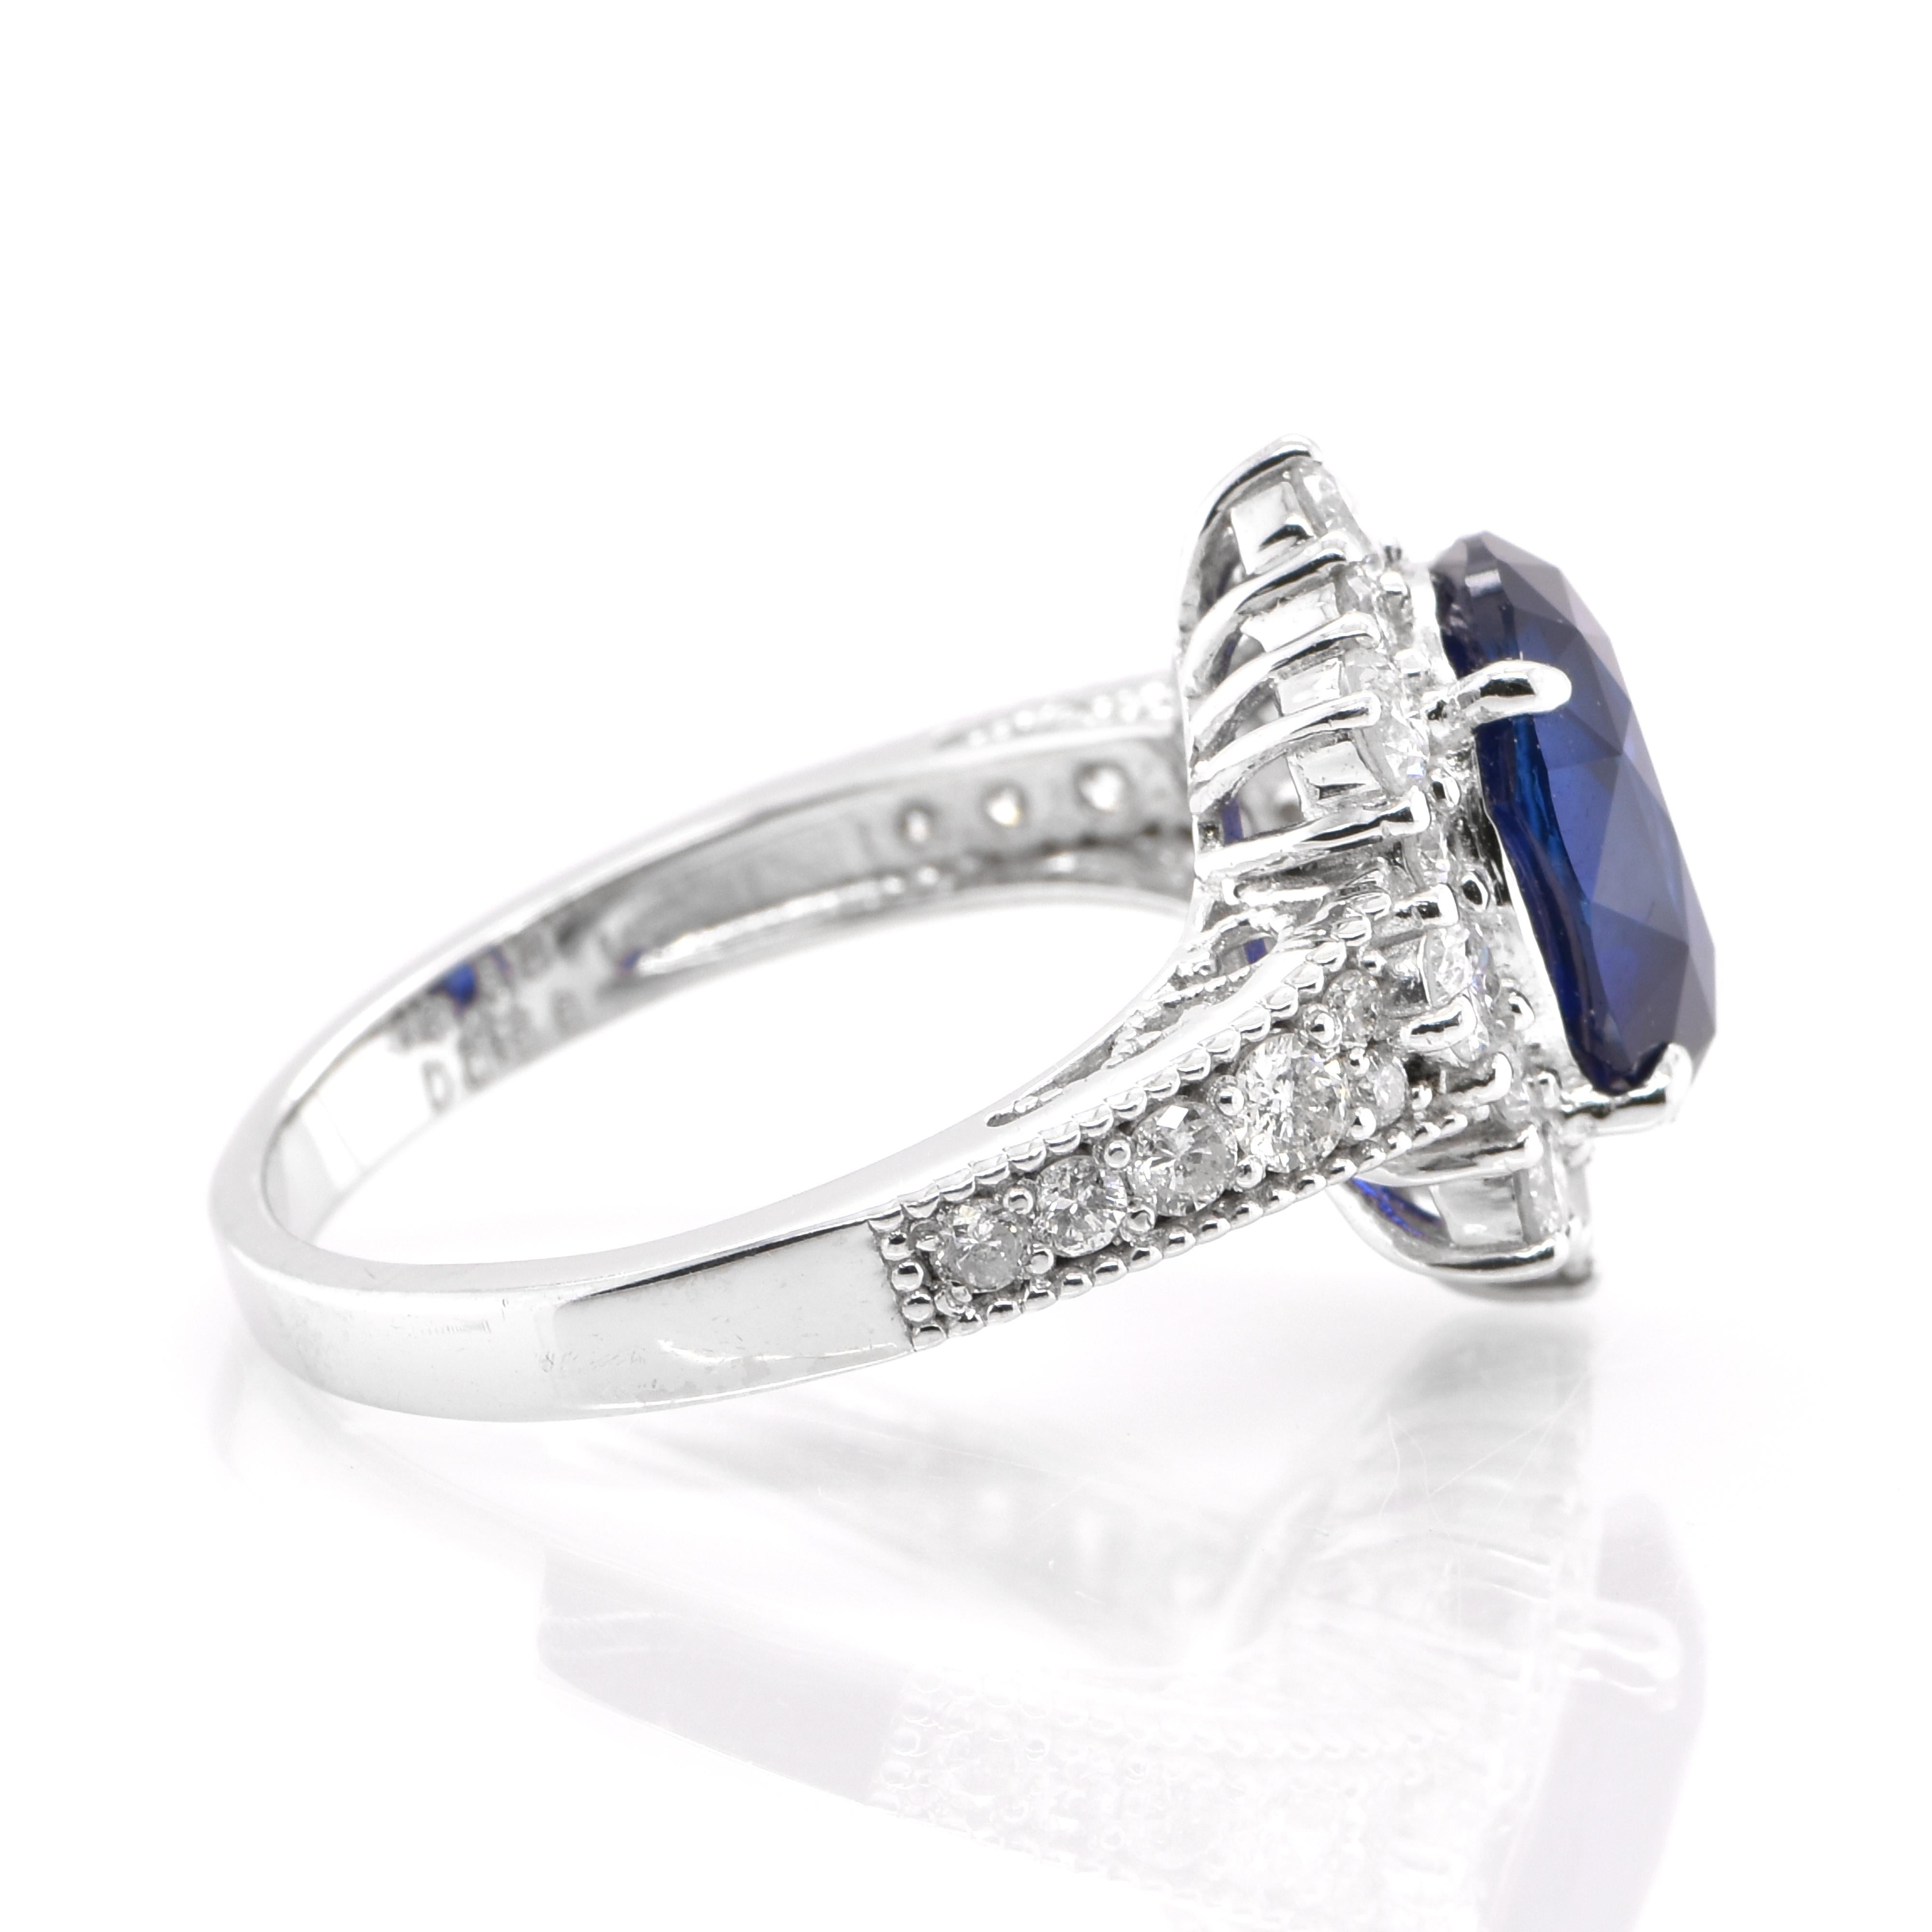 Oval Cut GIA Certified 3.50 Carat Natural Blue Sapphire and Diamond Ring Set in Platinum For Sale